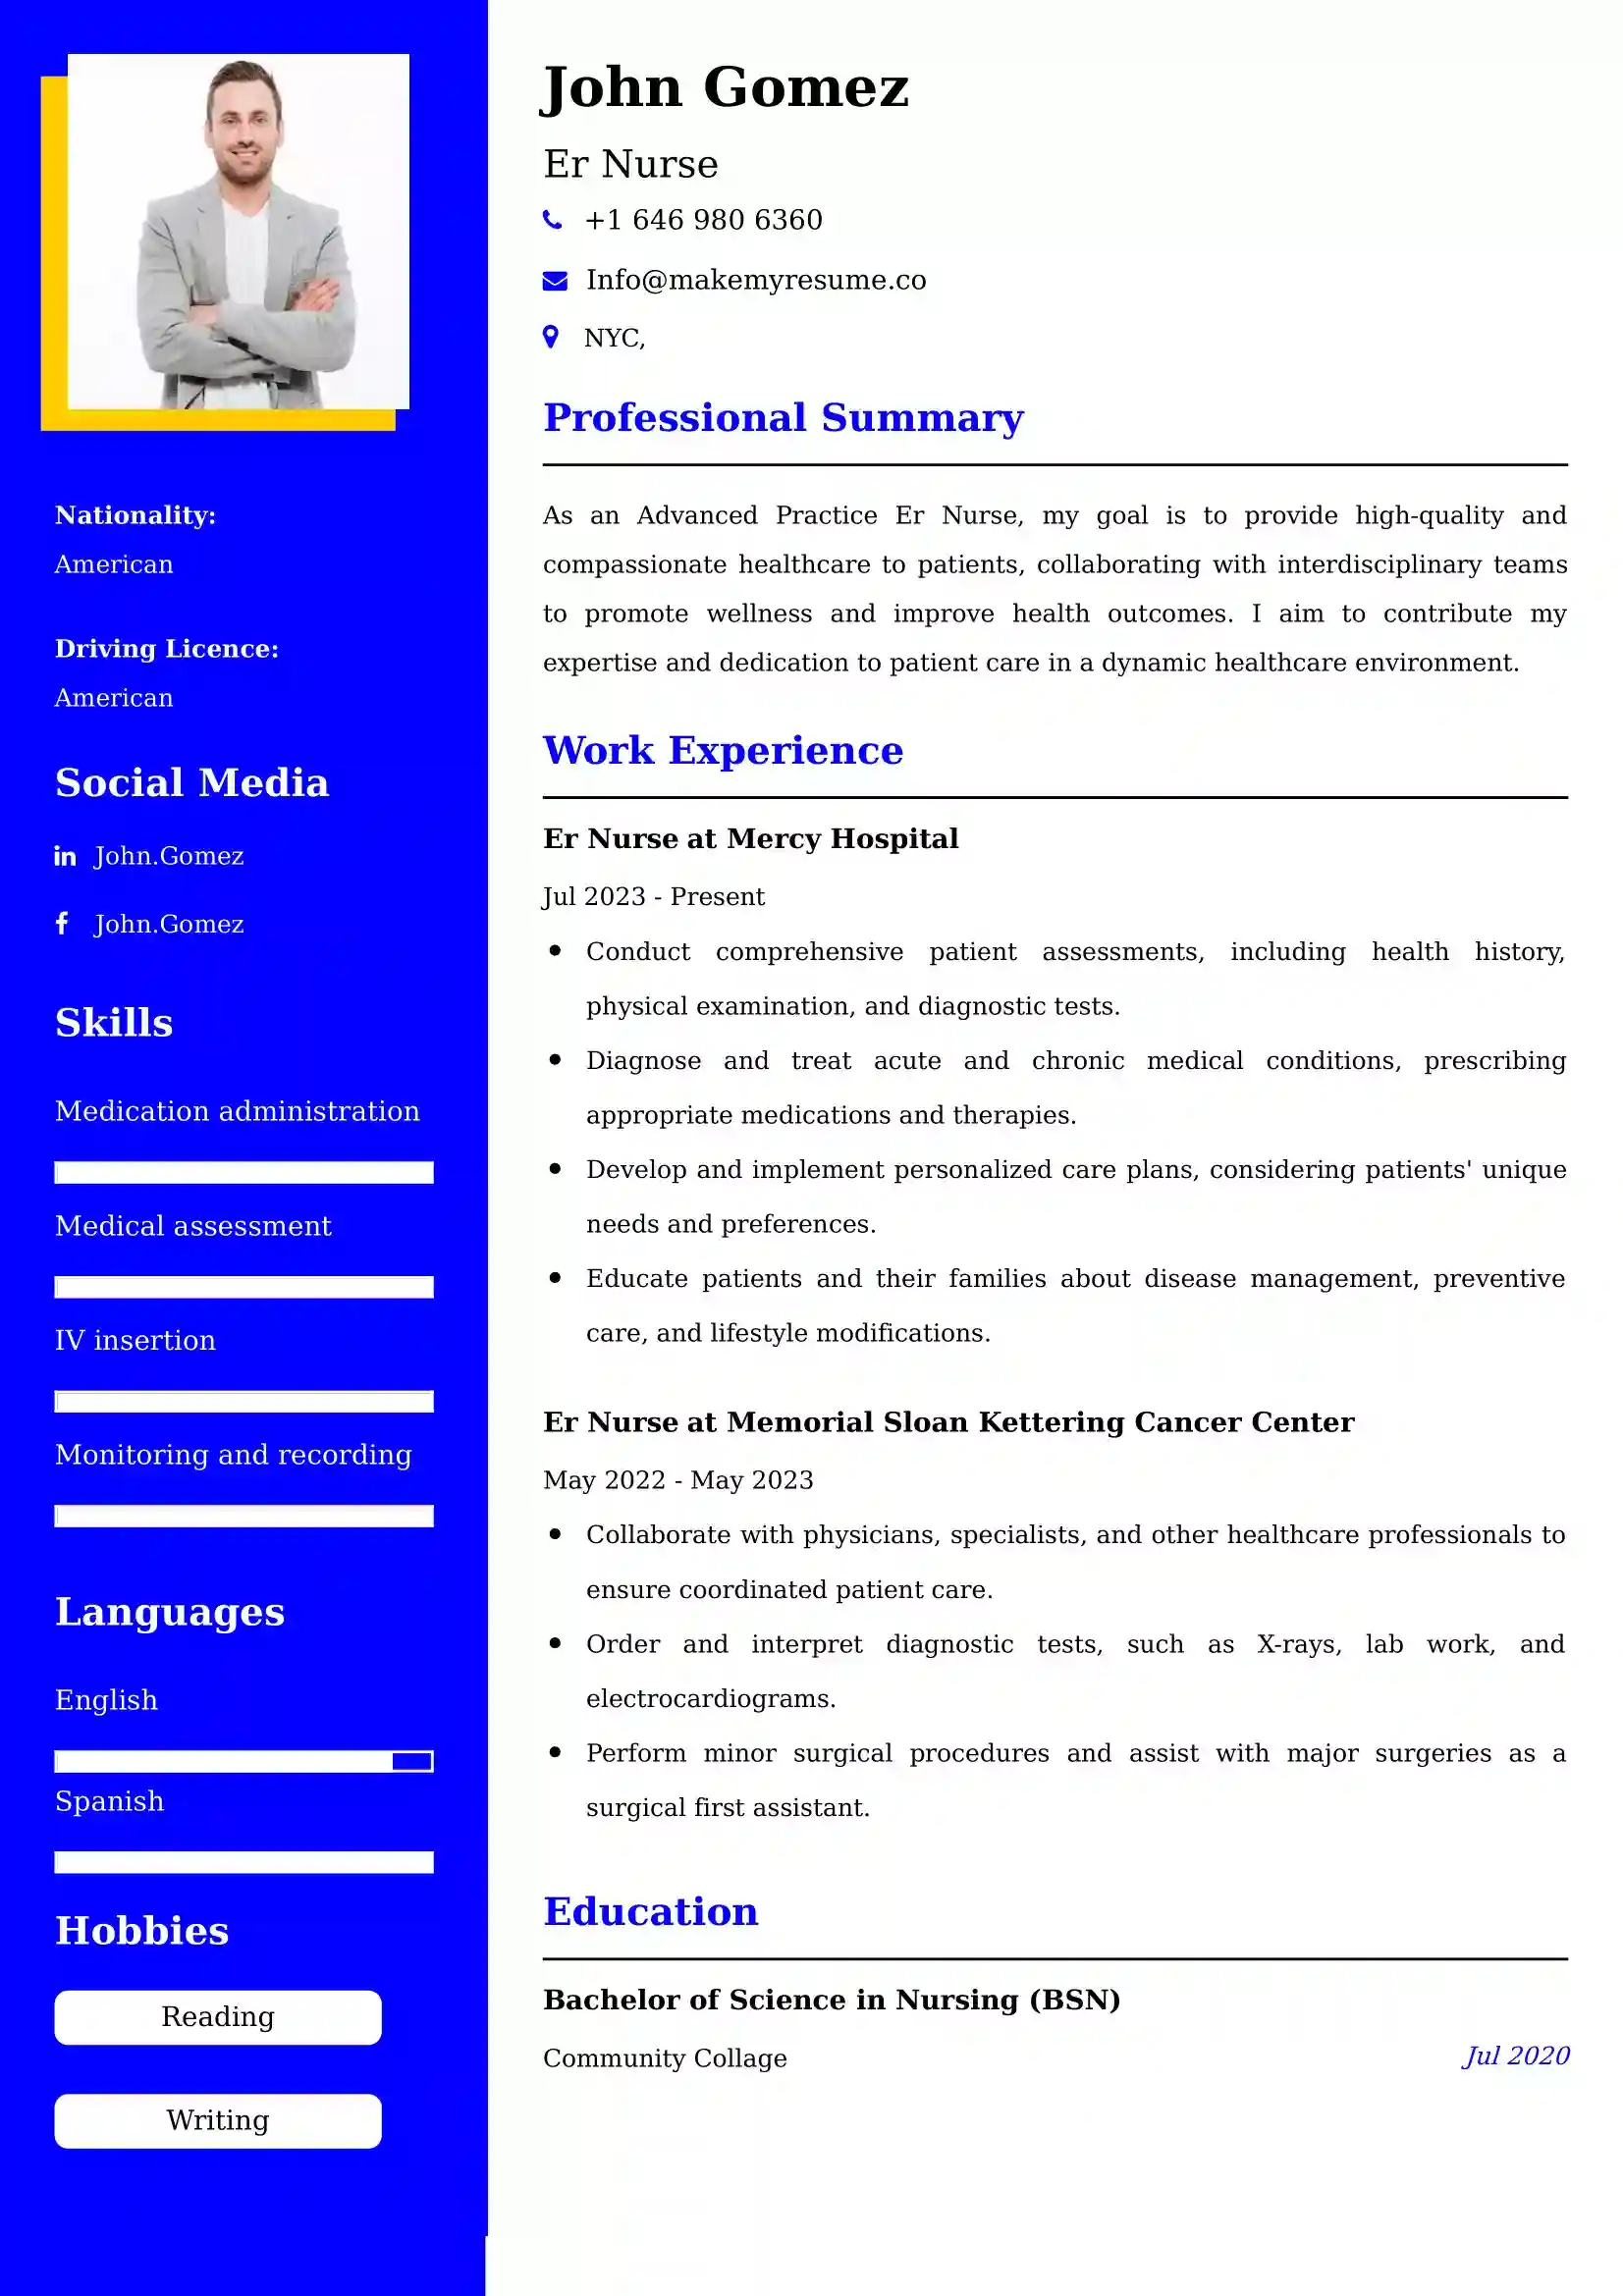 Er Nurse Resume Examples for UK Jobs - Tips and Guide